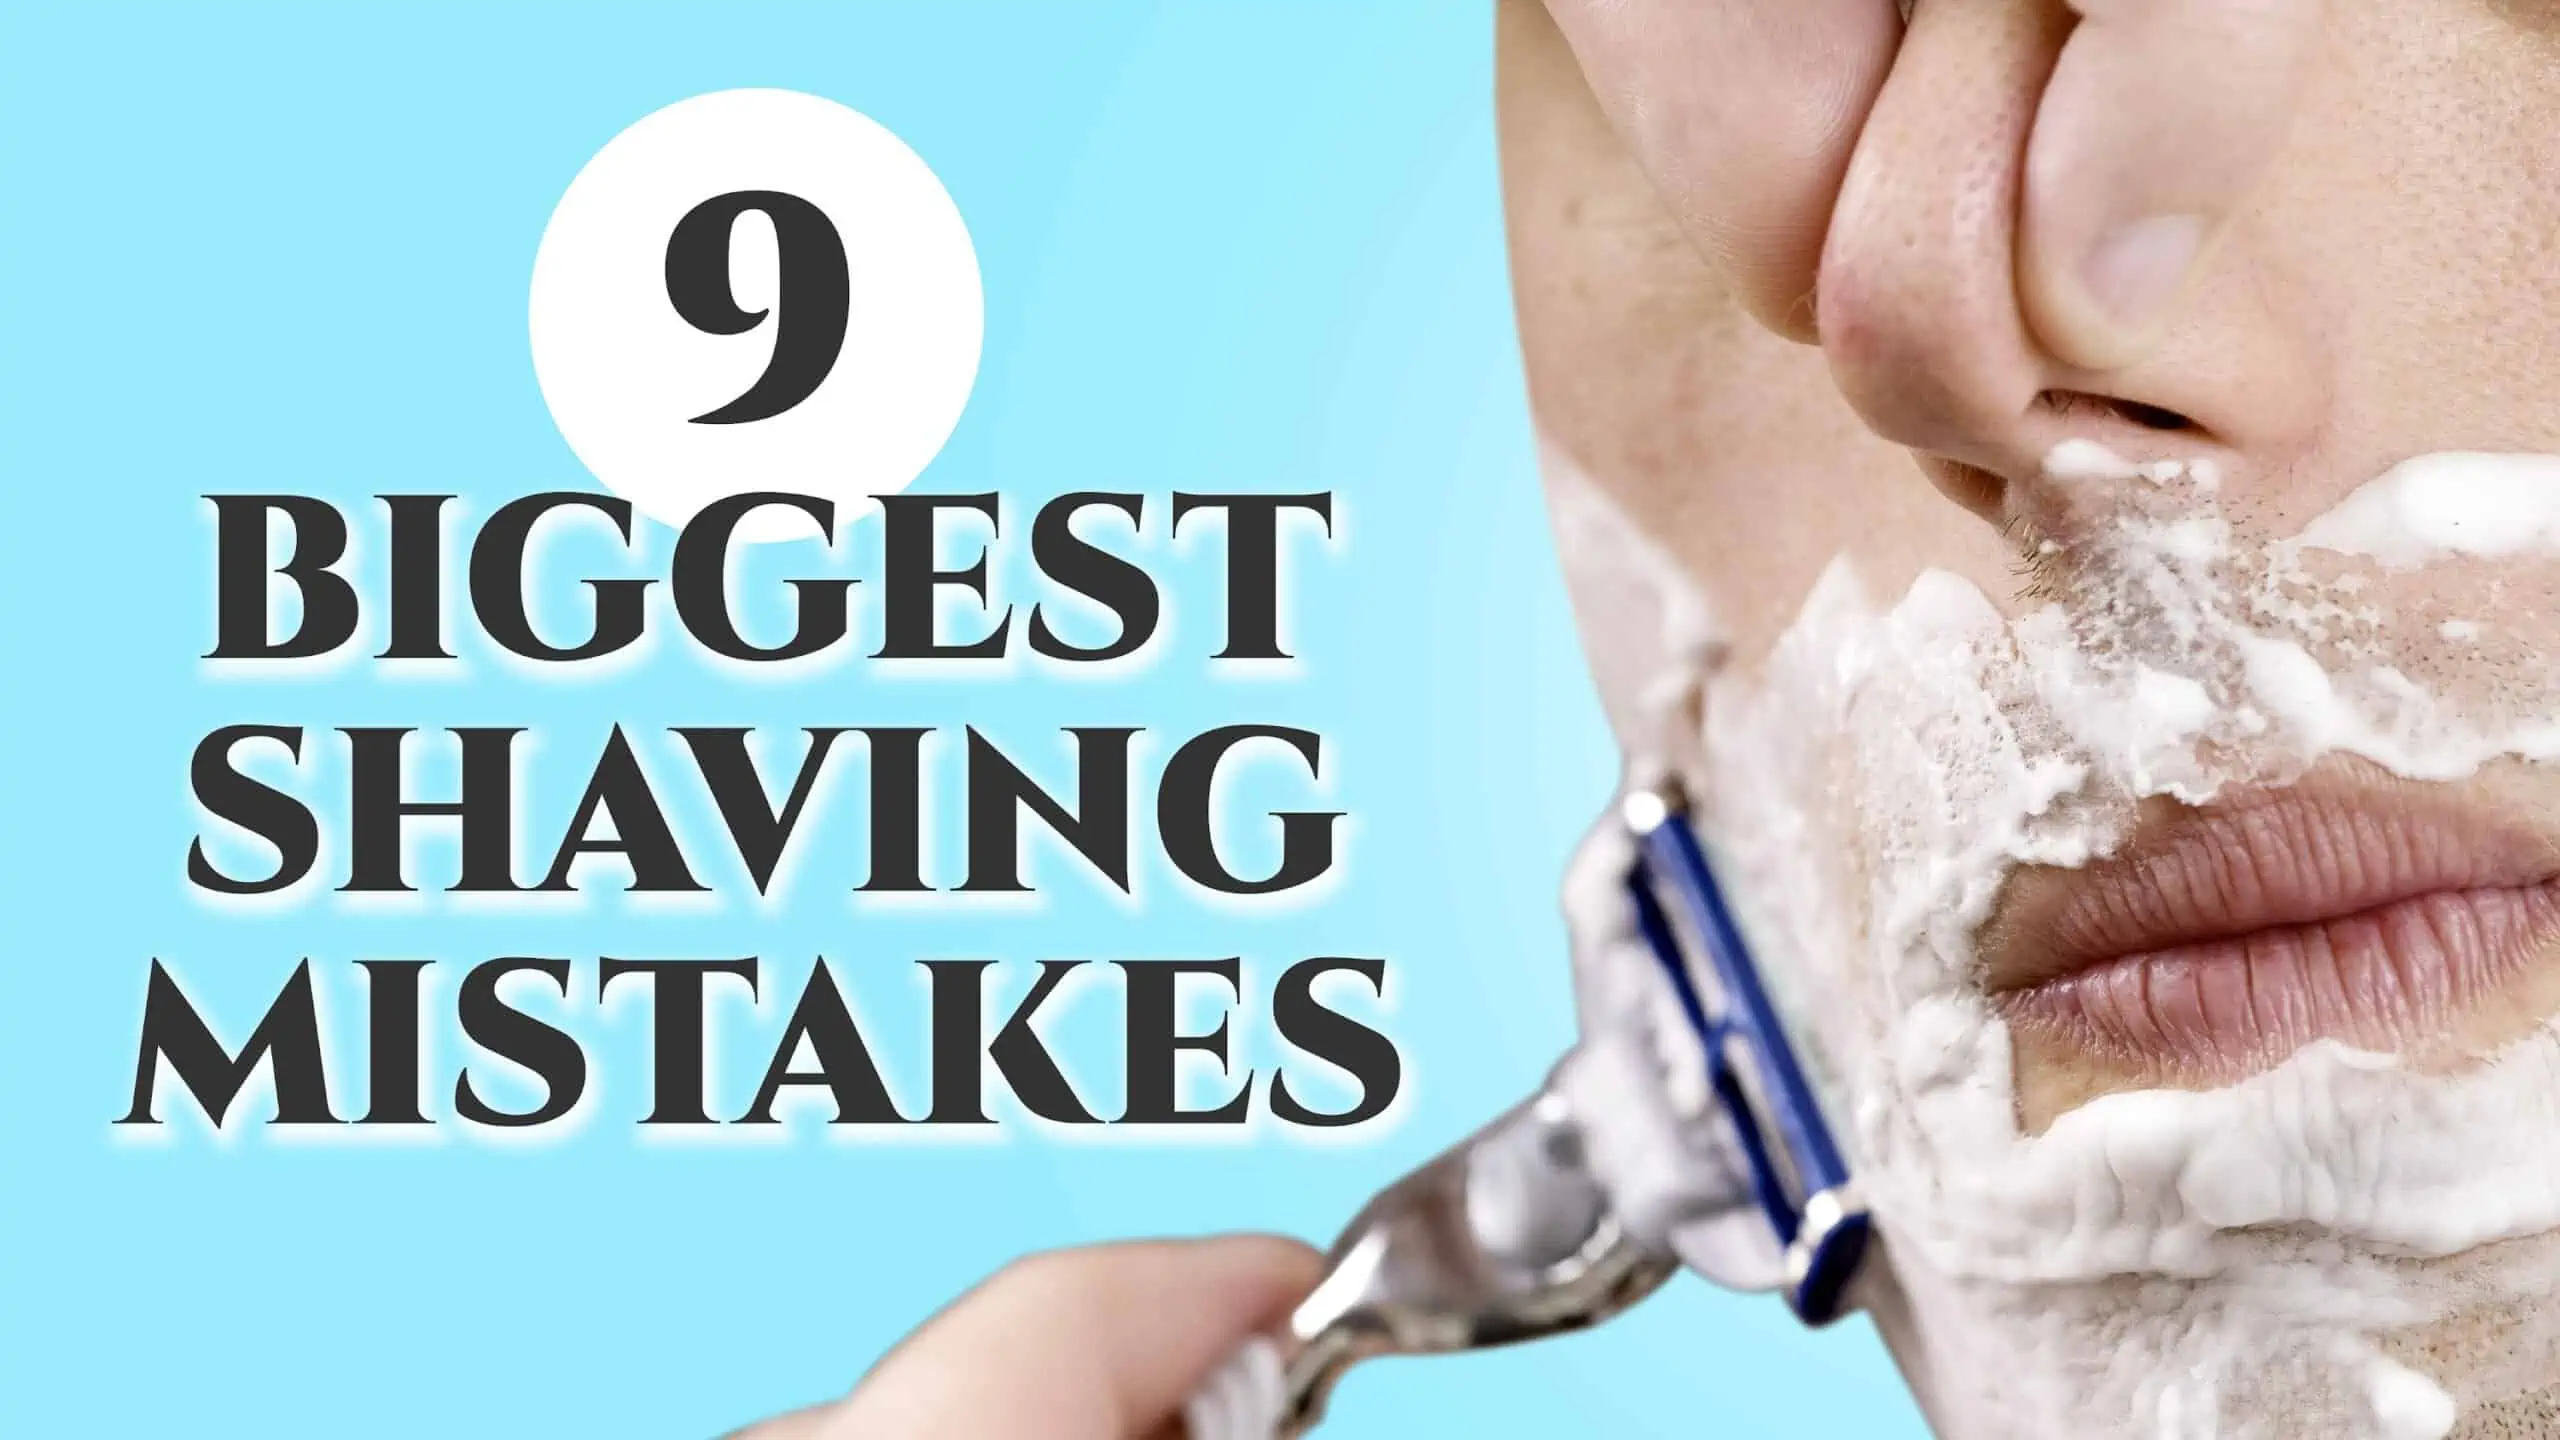 9 biggest shaving mistakes 3840x2160 scaled